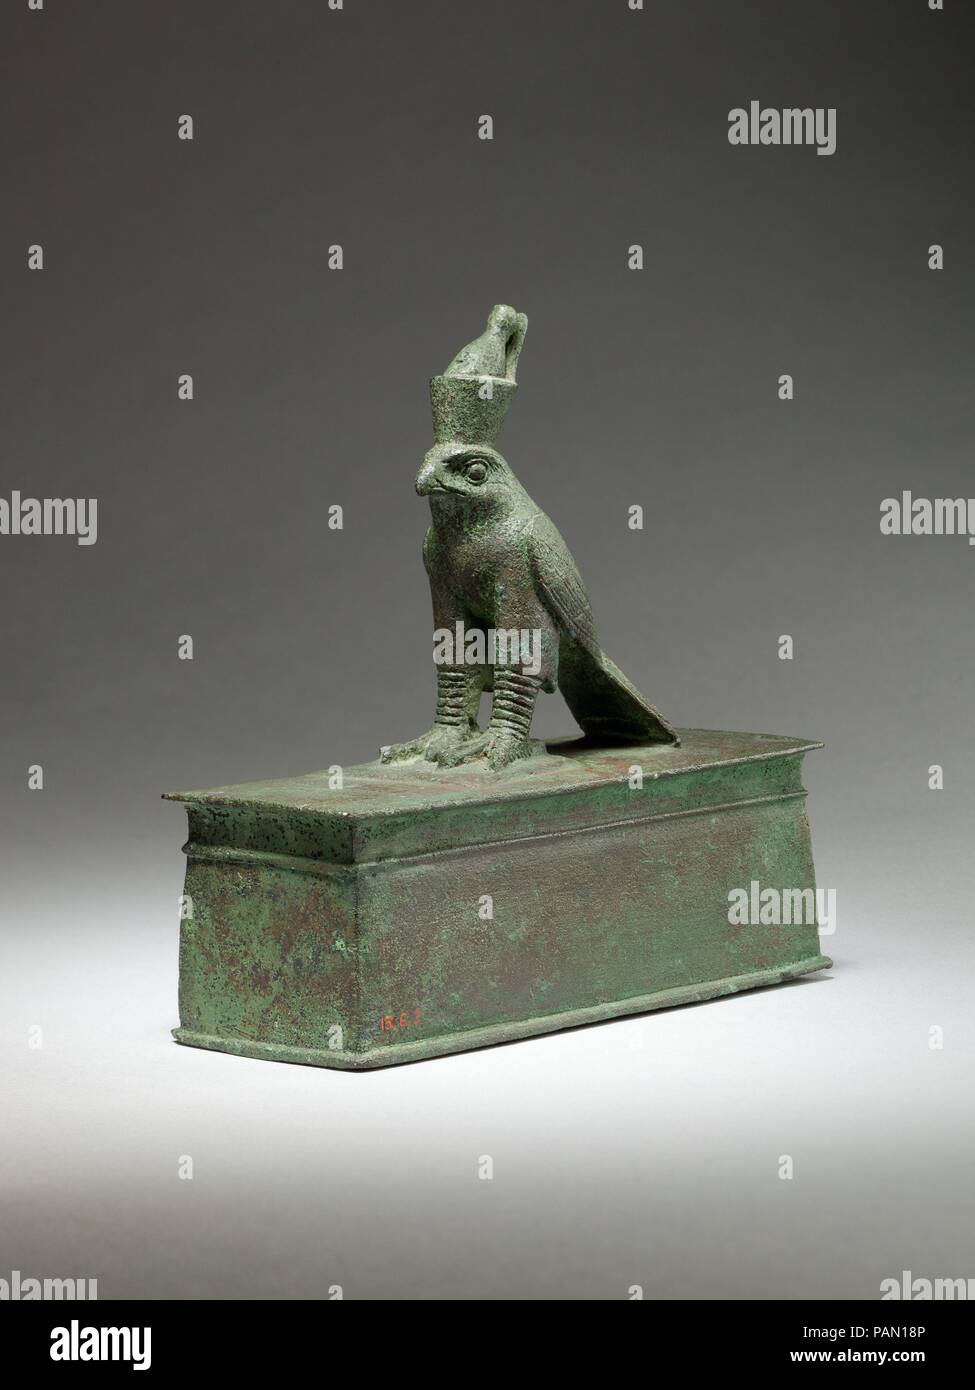 Falcon surmounting box for an animal mummy. Dimensions: H. 12.2 cm (4 13/16 in.); W. 4.5 cm (1 3/4 in.); L. 12.4 cm (4 7/8 in.). Date: 664-30 B.C..  The falcon god Horus stands with his wings swept back. He wears the double crown of Egypt, a royal crown that symbolizes the union of Lower and Upper Egypt, and highlights Horus' role as the legitimate ruler of the entire land. The crown's elements are distinct and well made: the red crown of Lower Egypt, lacking only its curling spiral at the front, and the white crown of Upper Egypt. The falcon wears the double crown because Horus and the concep Stock Photo